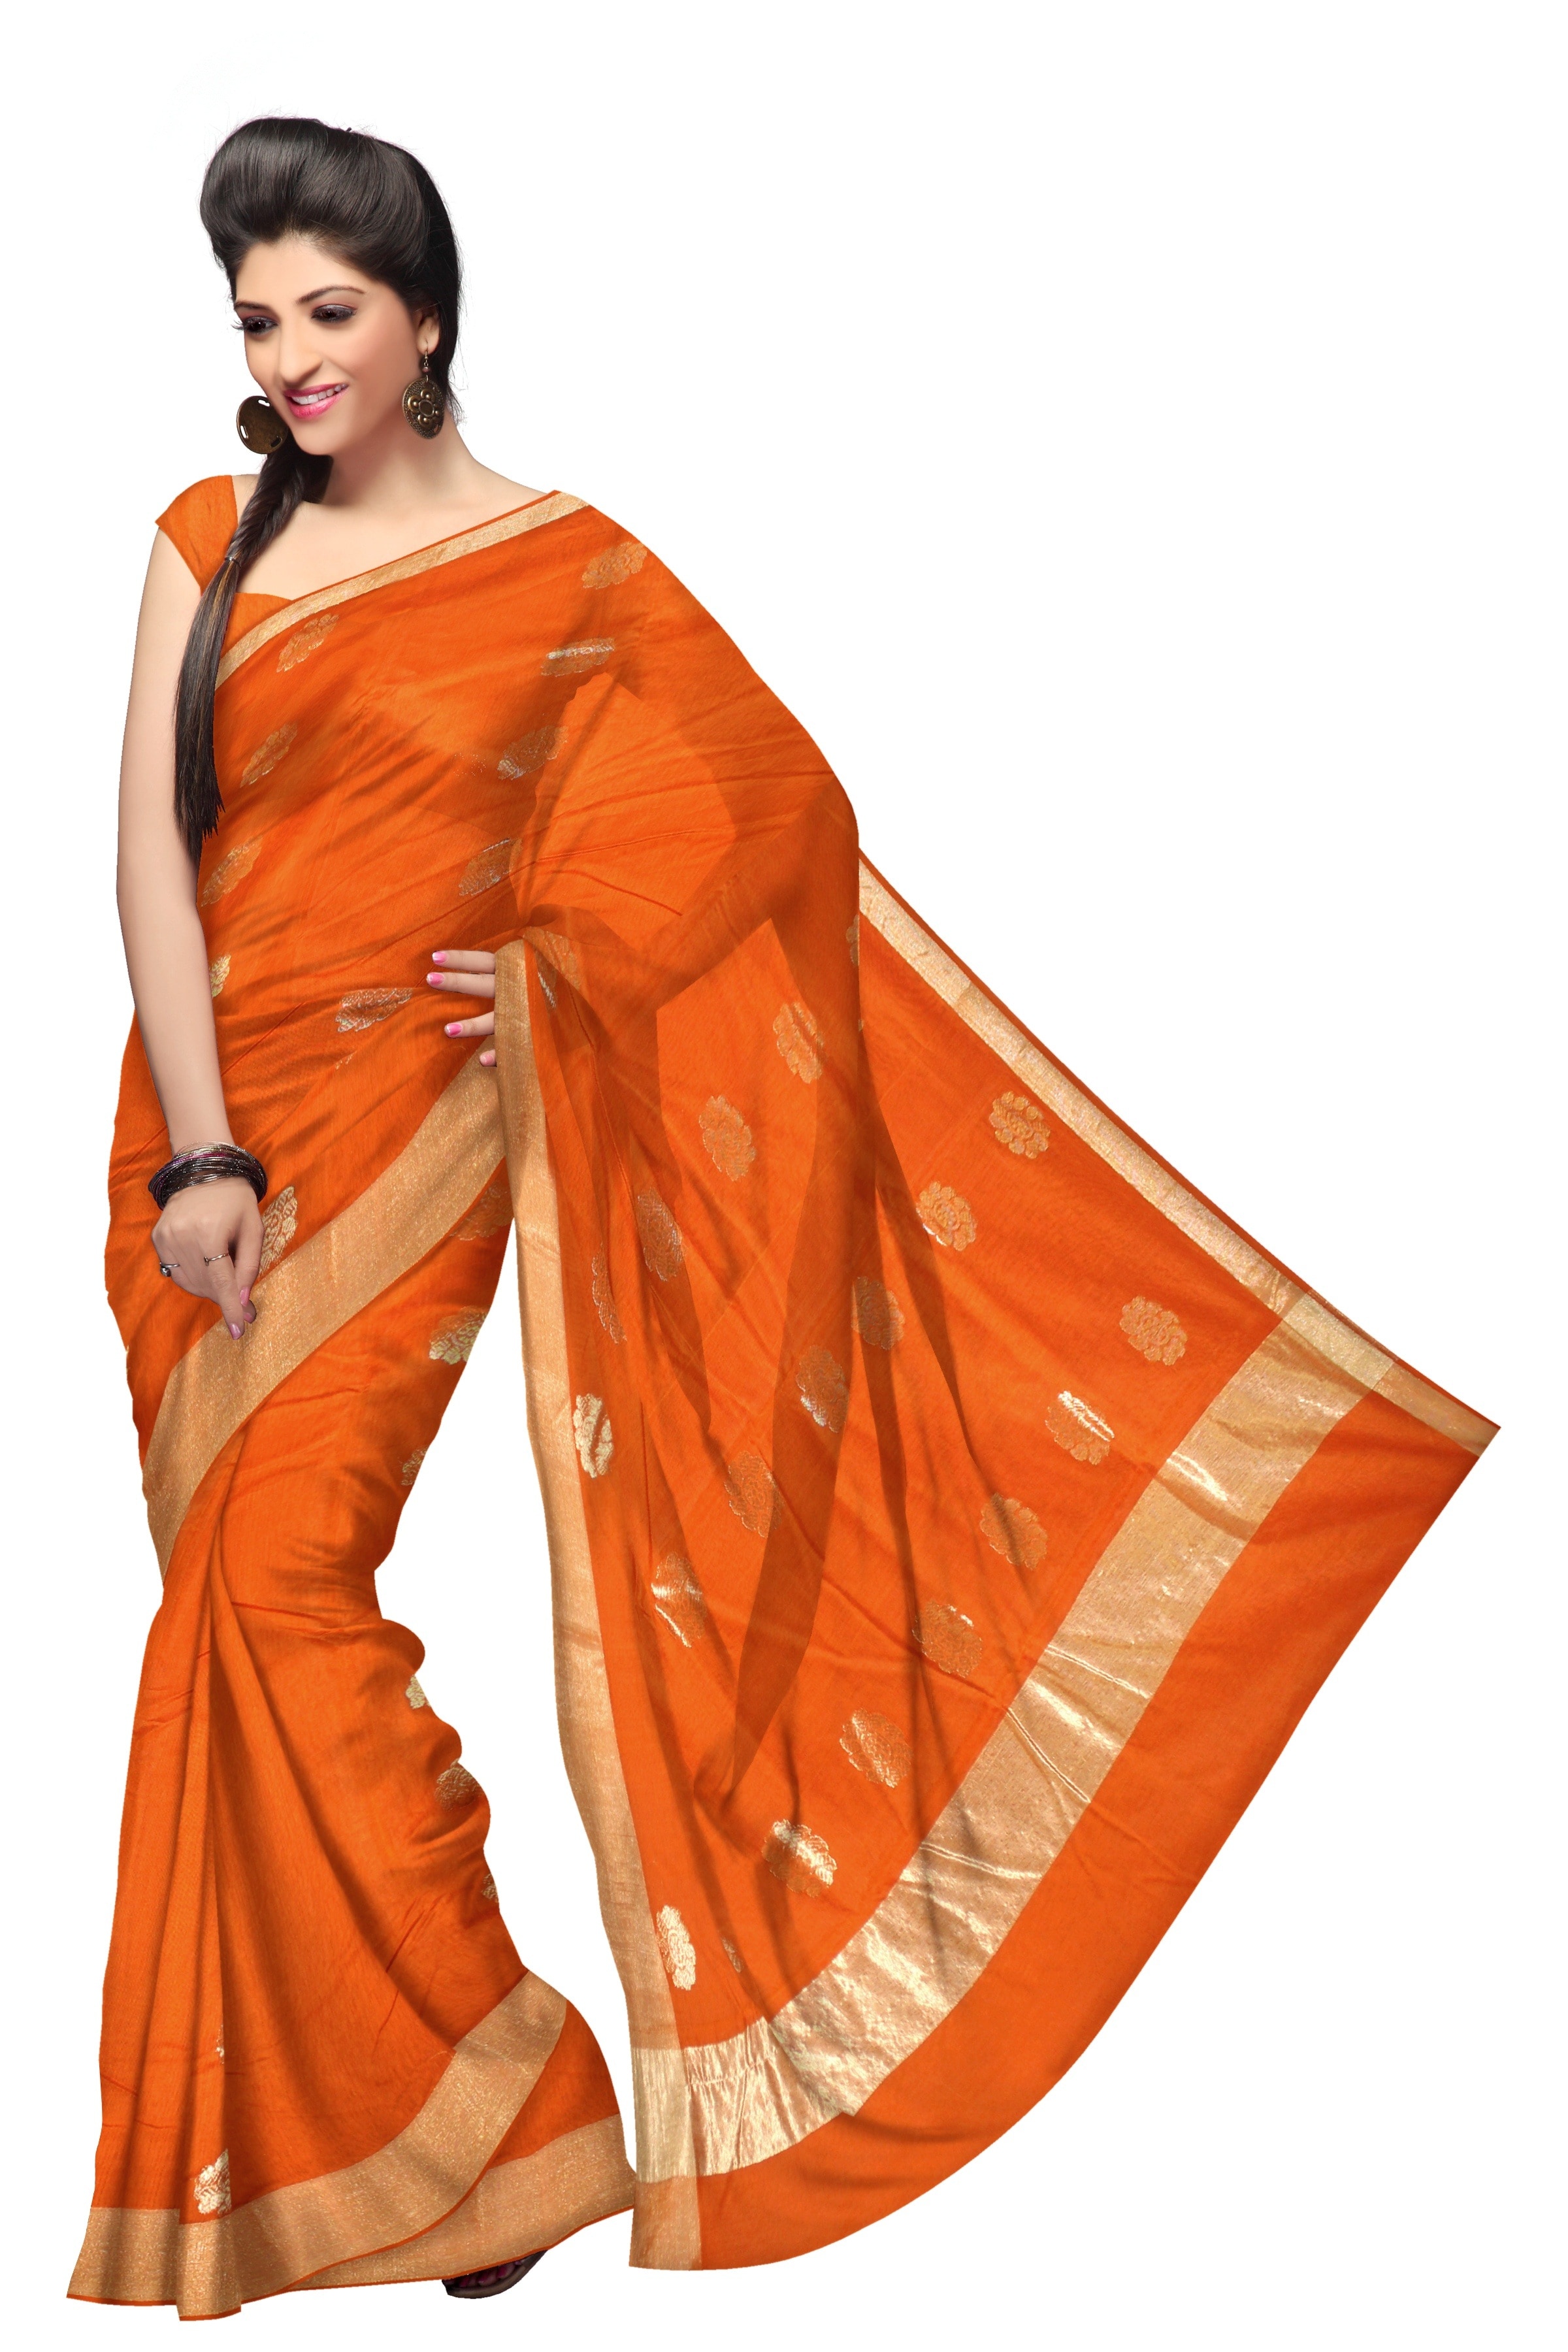 Dress, Fashion, Saree, Silk, Woman, one young woman only, young adult